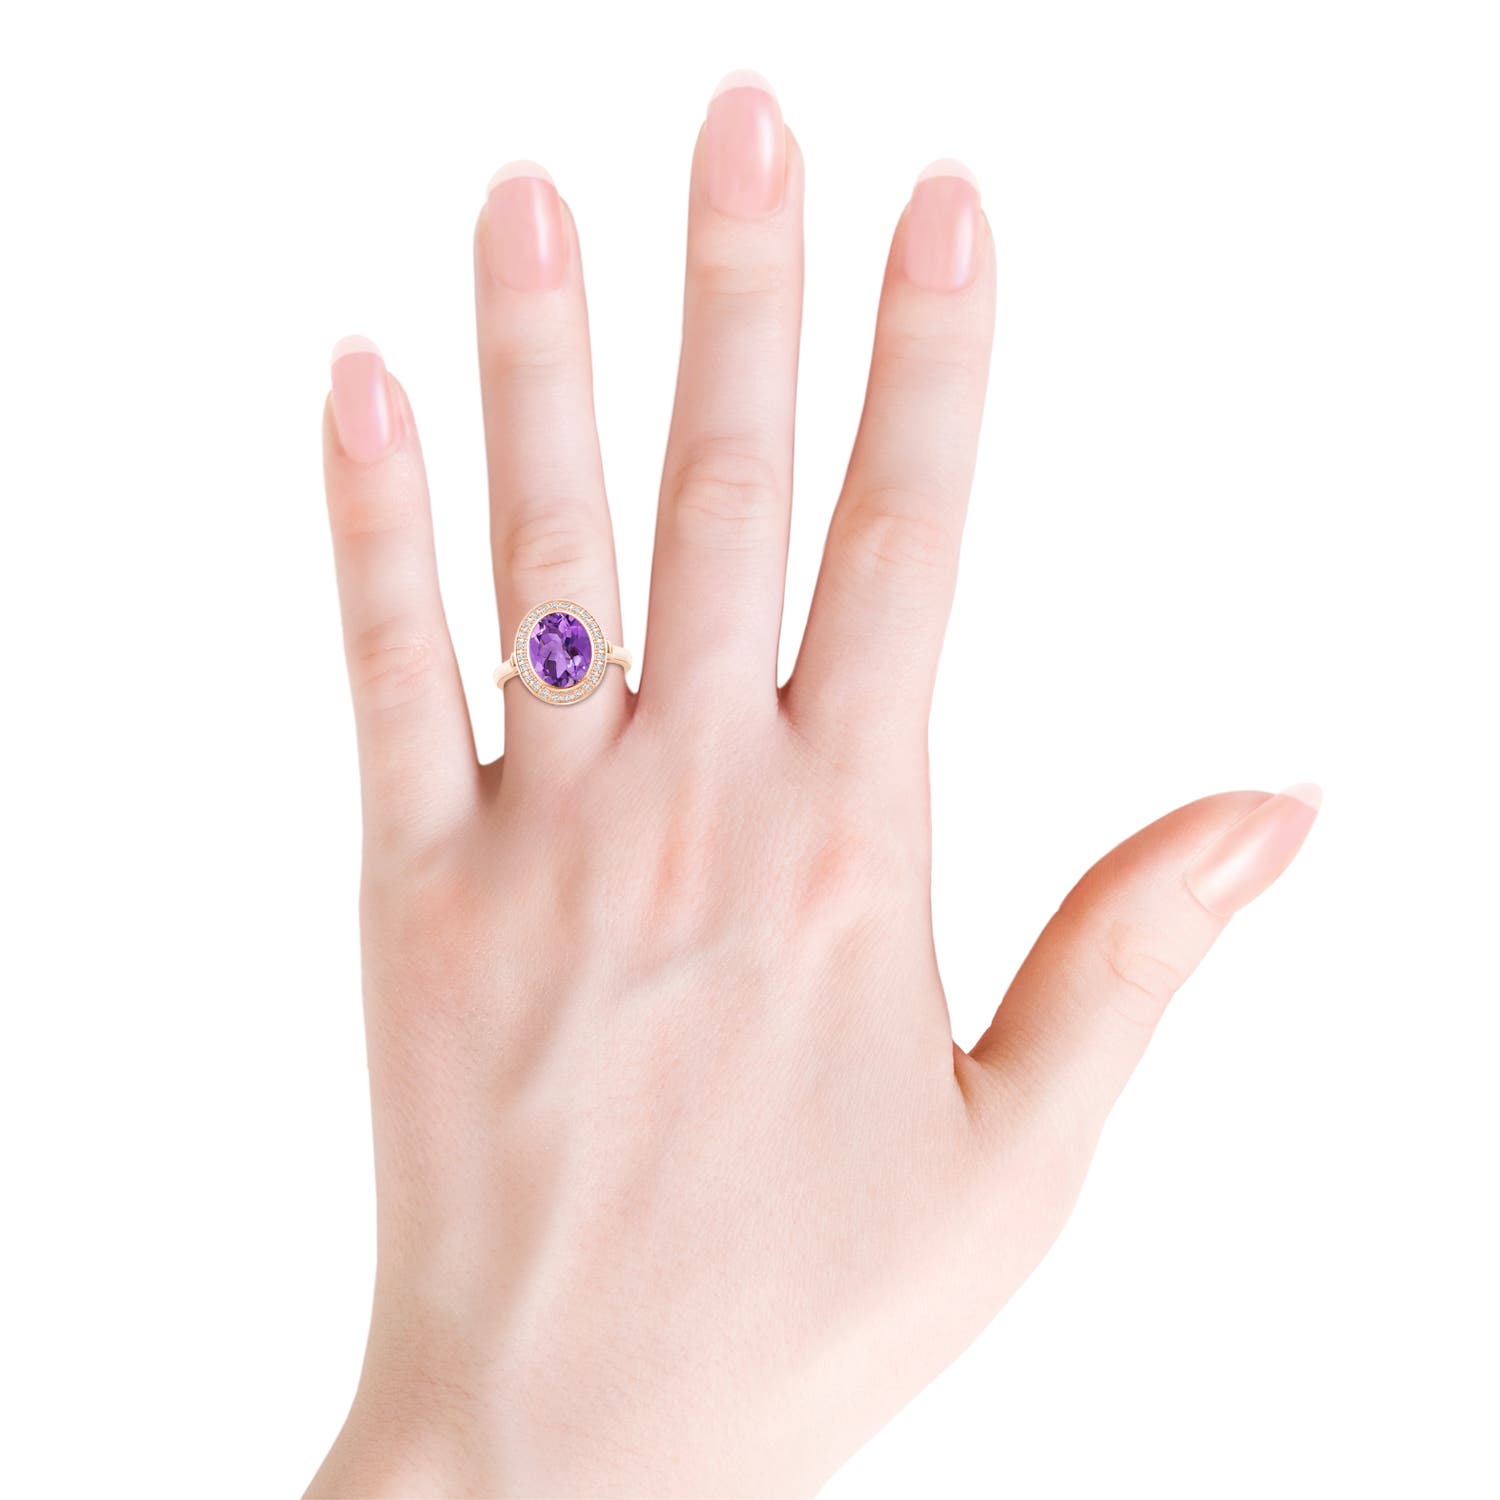 AA - Amethyst / 2.44 CT / 14 KT Rose Gold